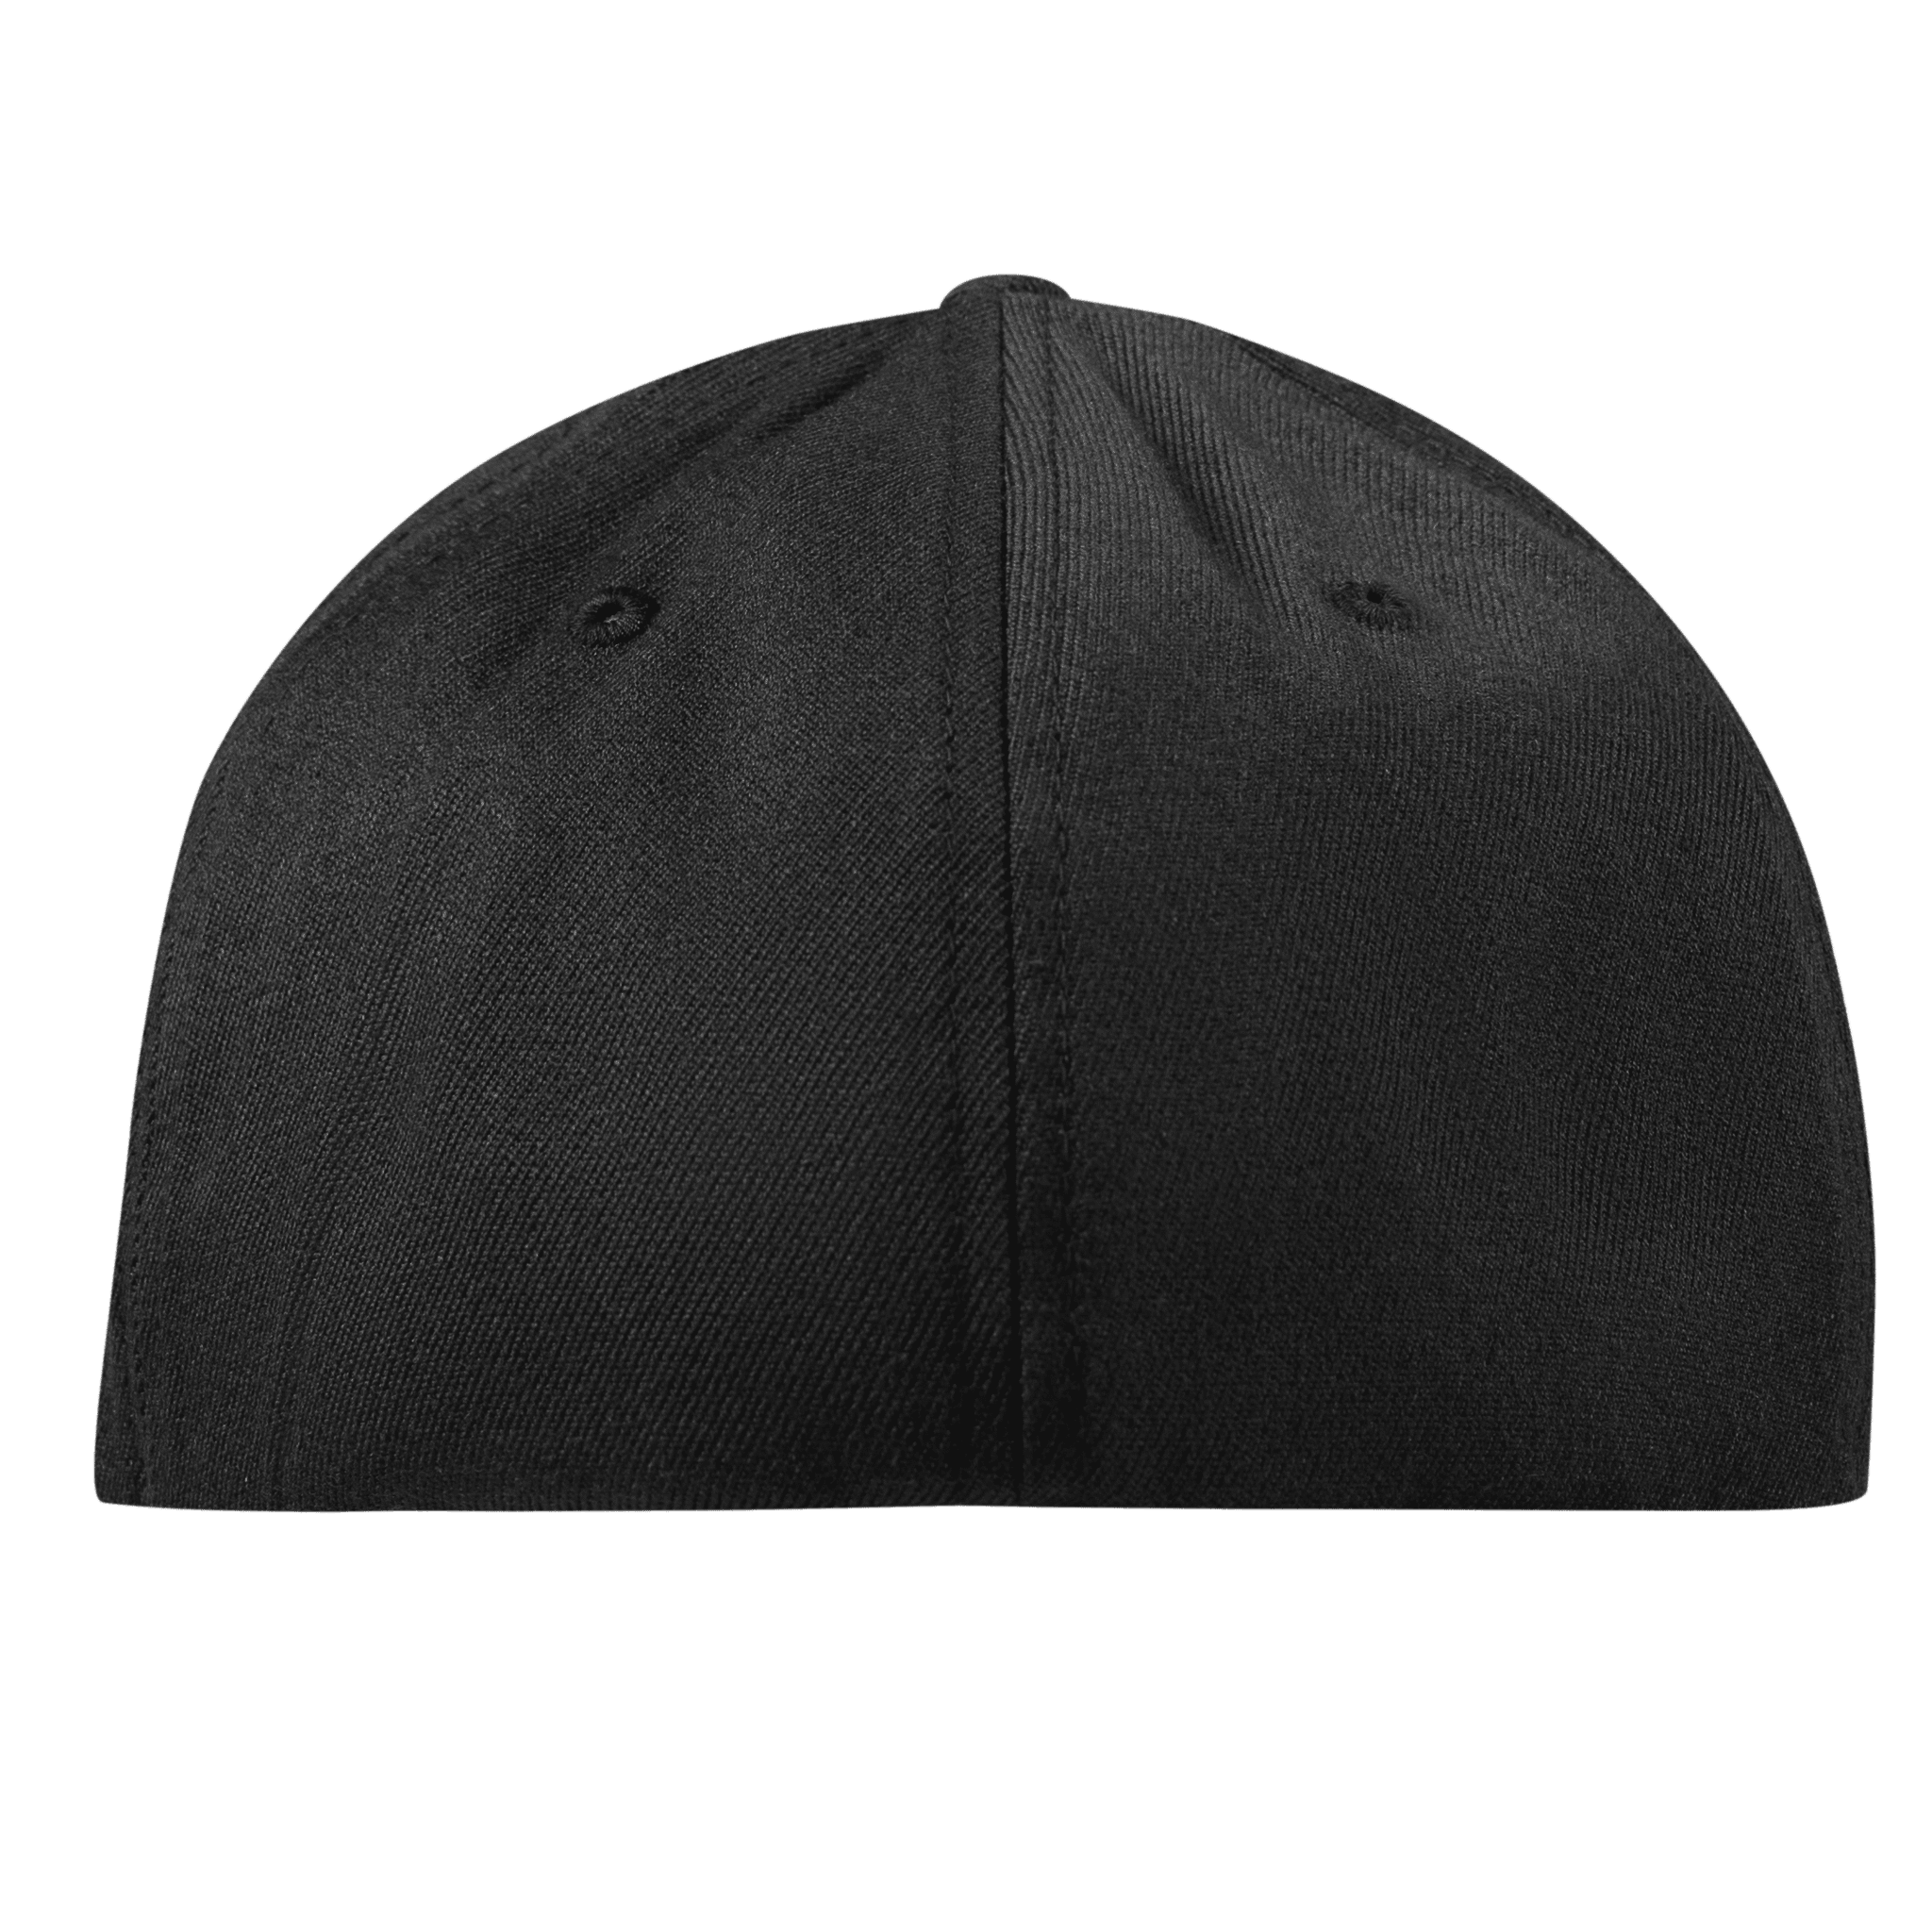 New Mexico Vintage Flexfit Fitted Back Black